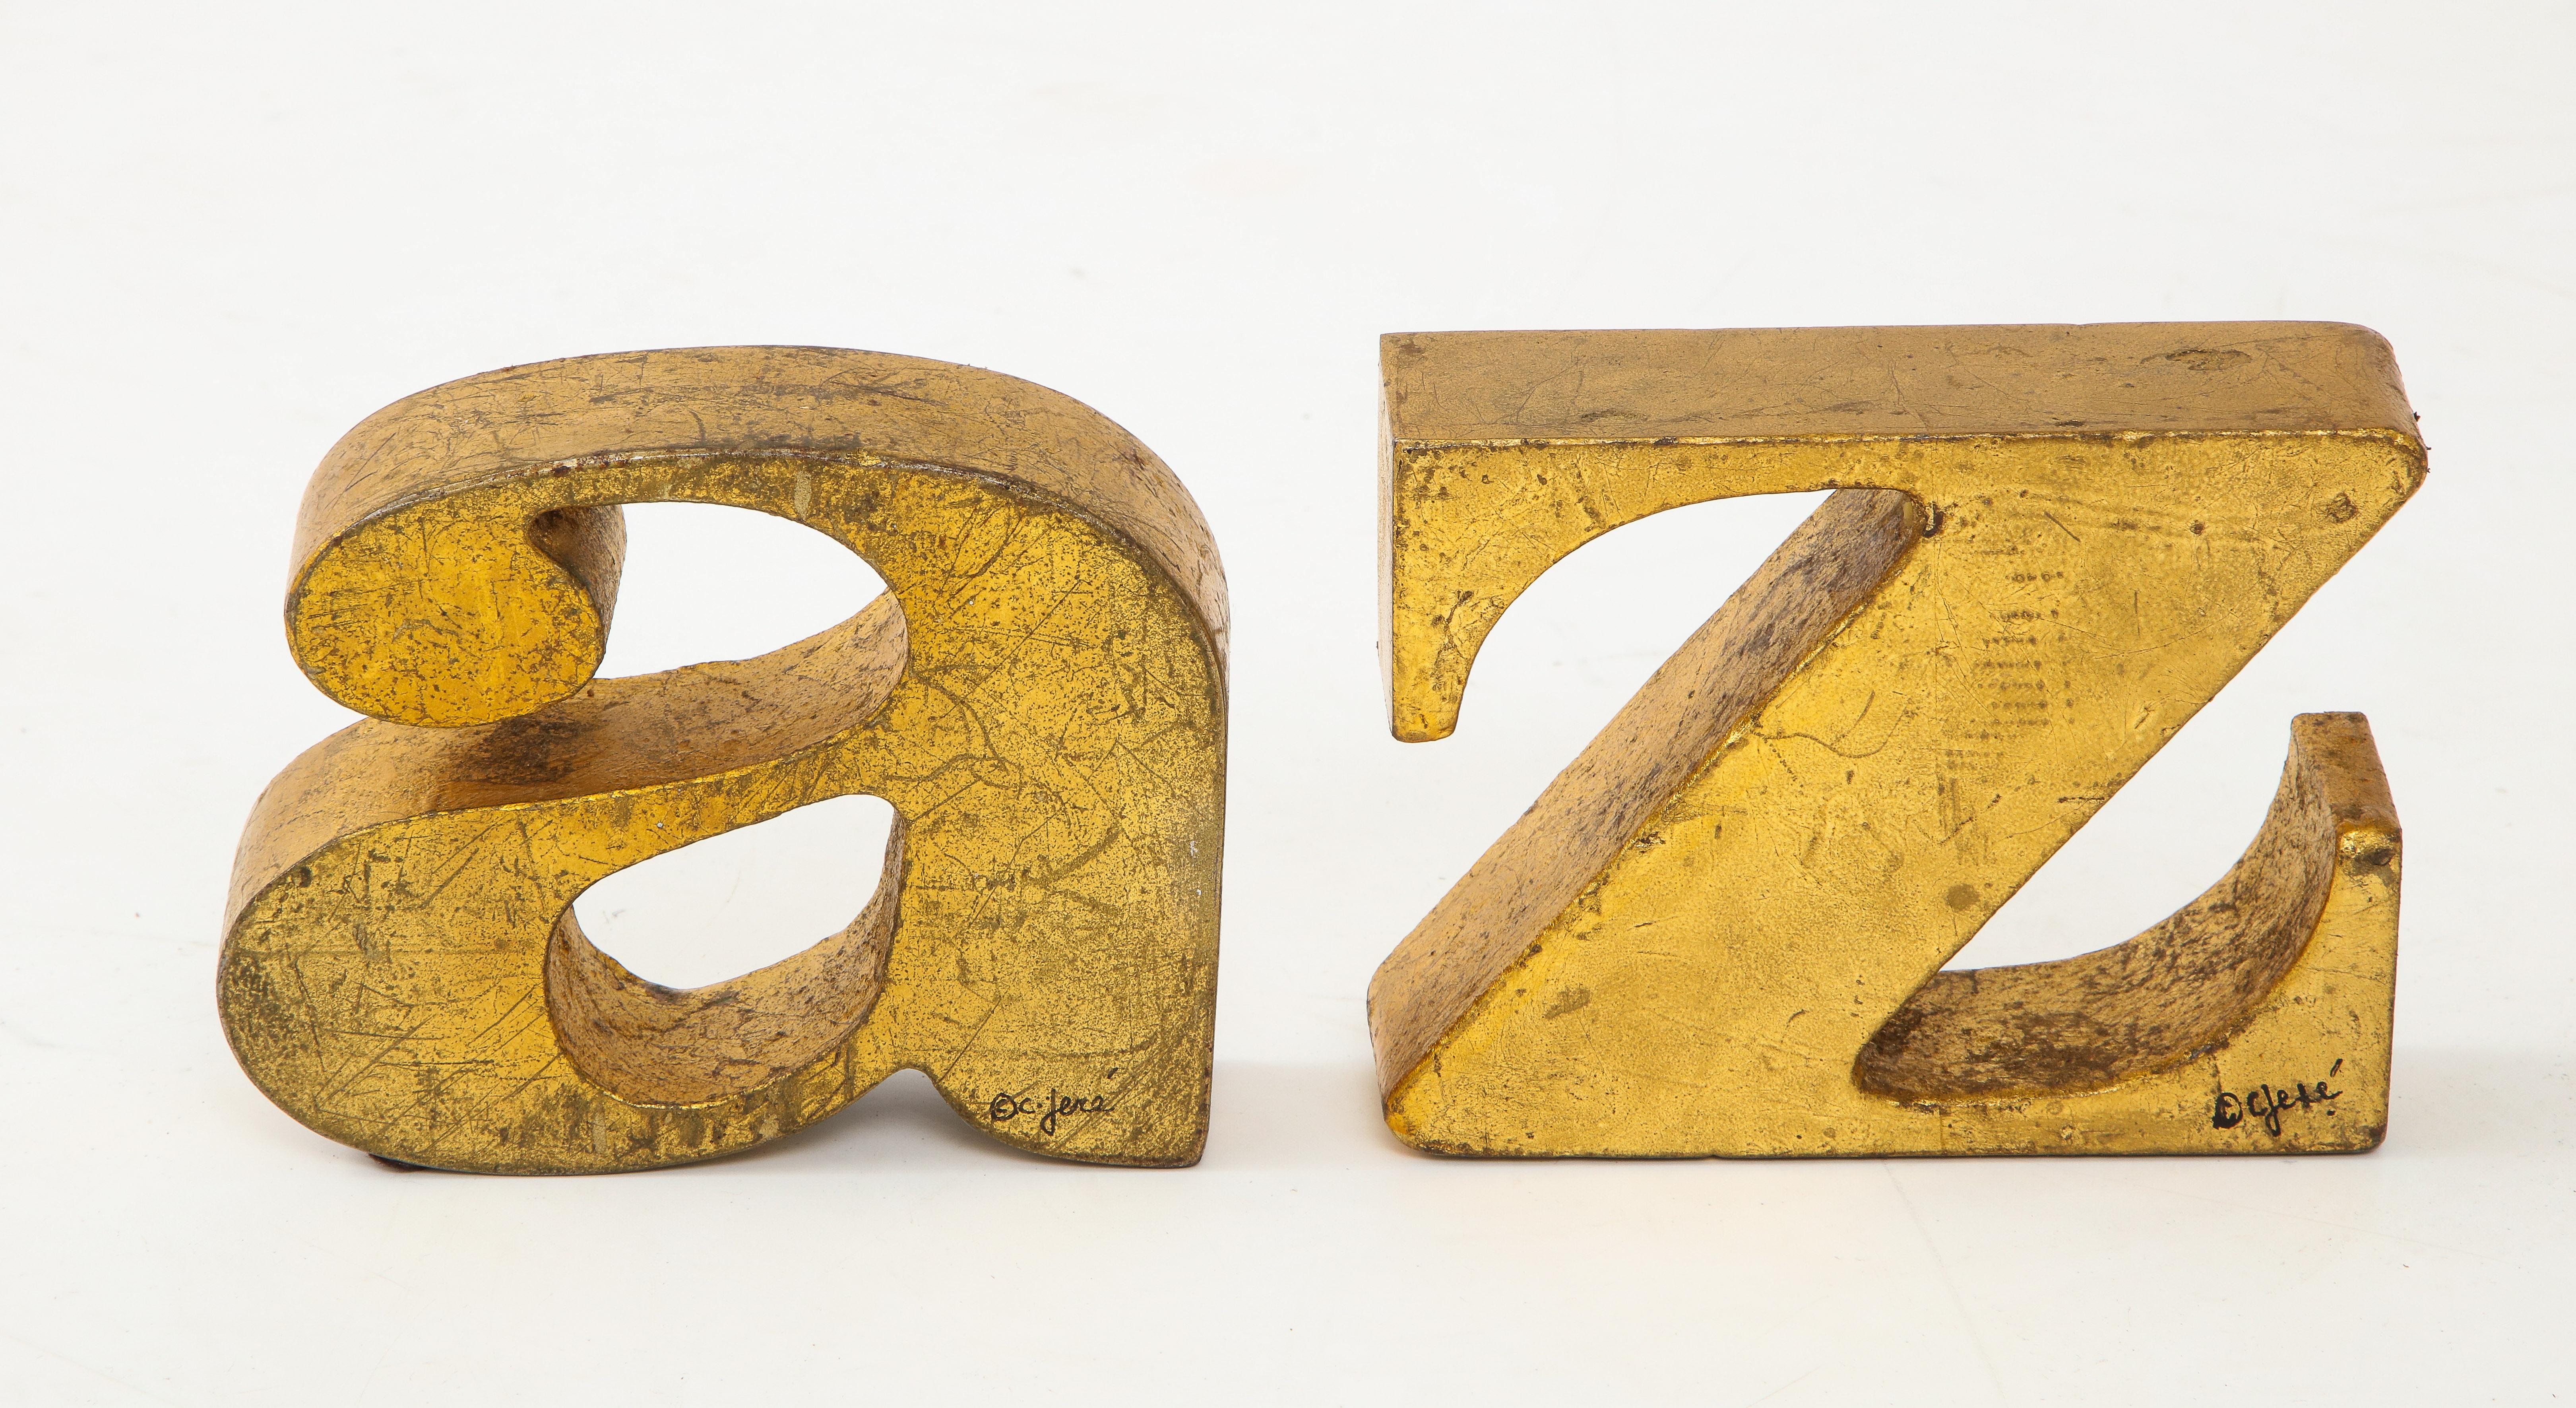 1970s Mid-Century Modern solid iron with gold leaf finish. Both of them are signed and labeled.